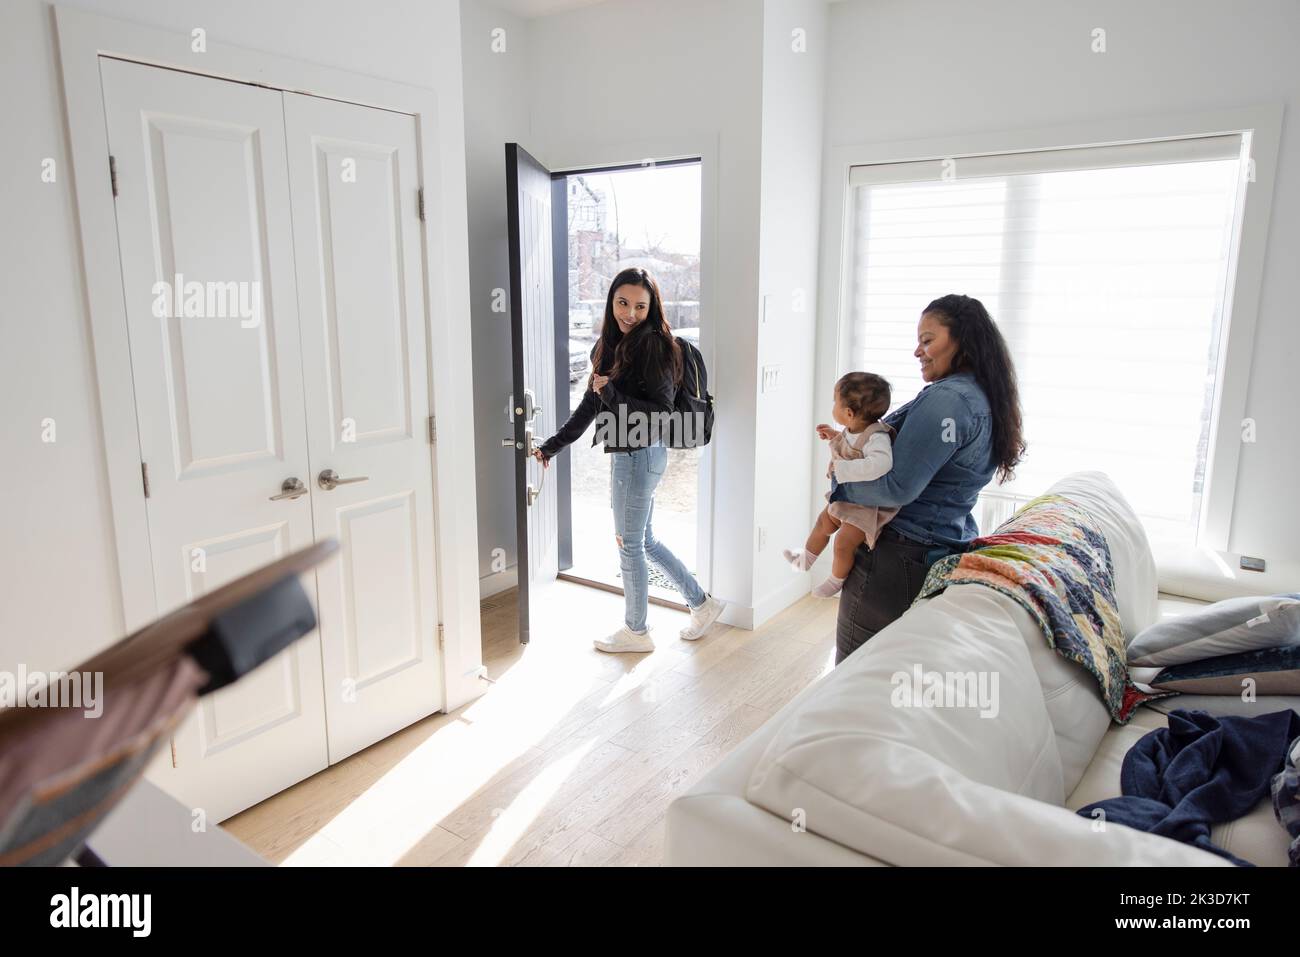 Woman with backpack leaving baby daughter and mother at home Stock Photo